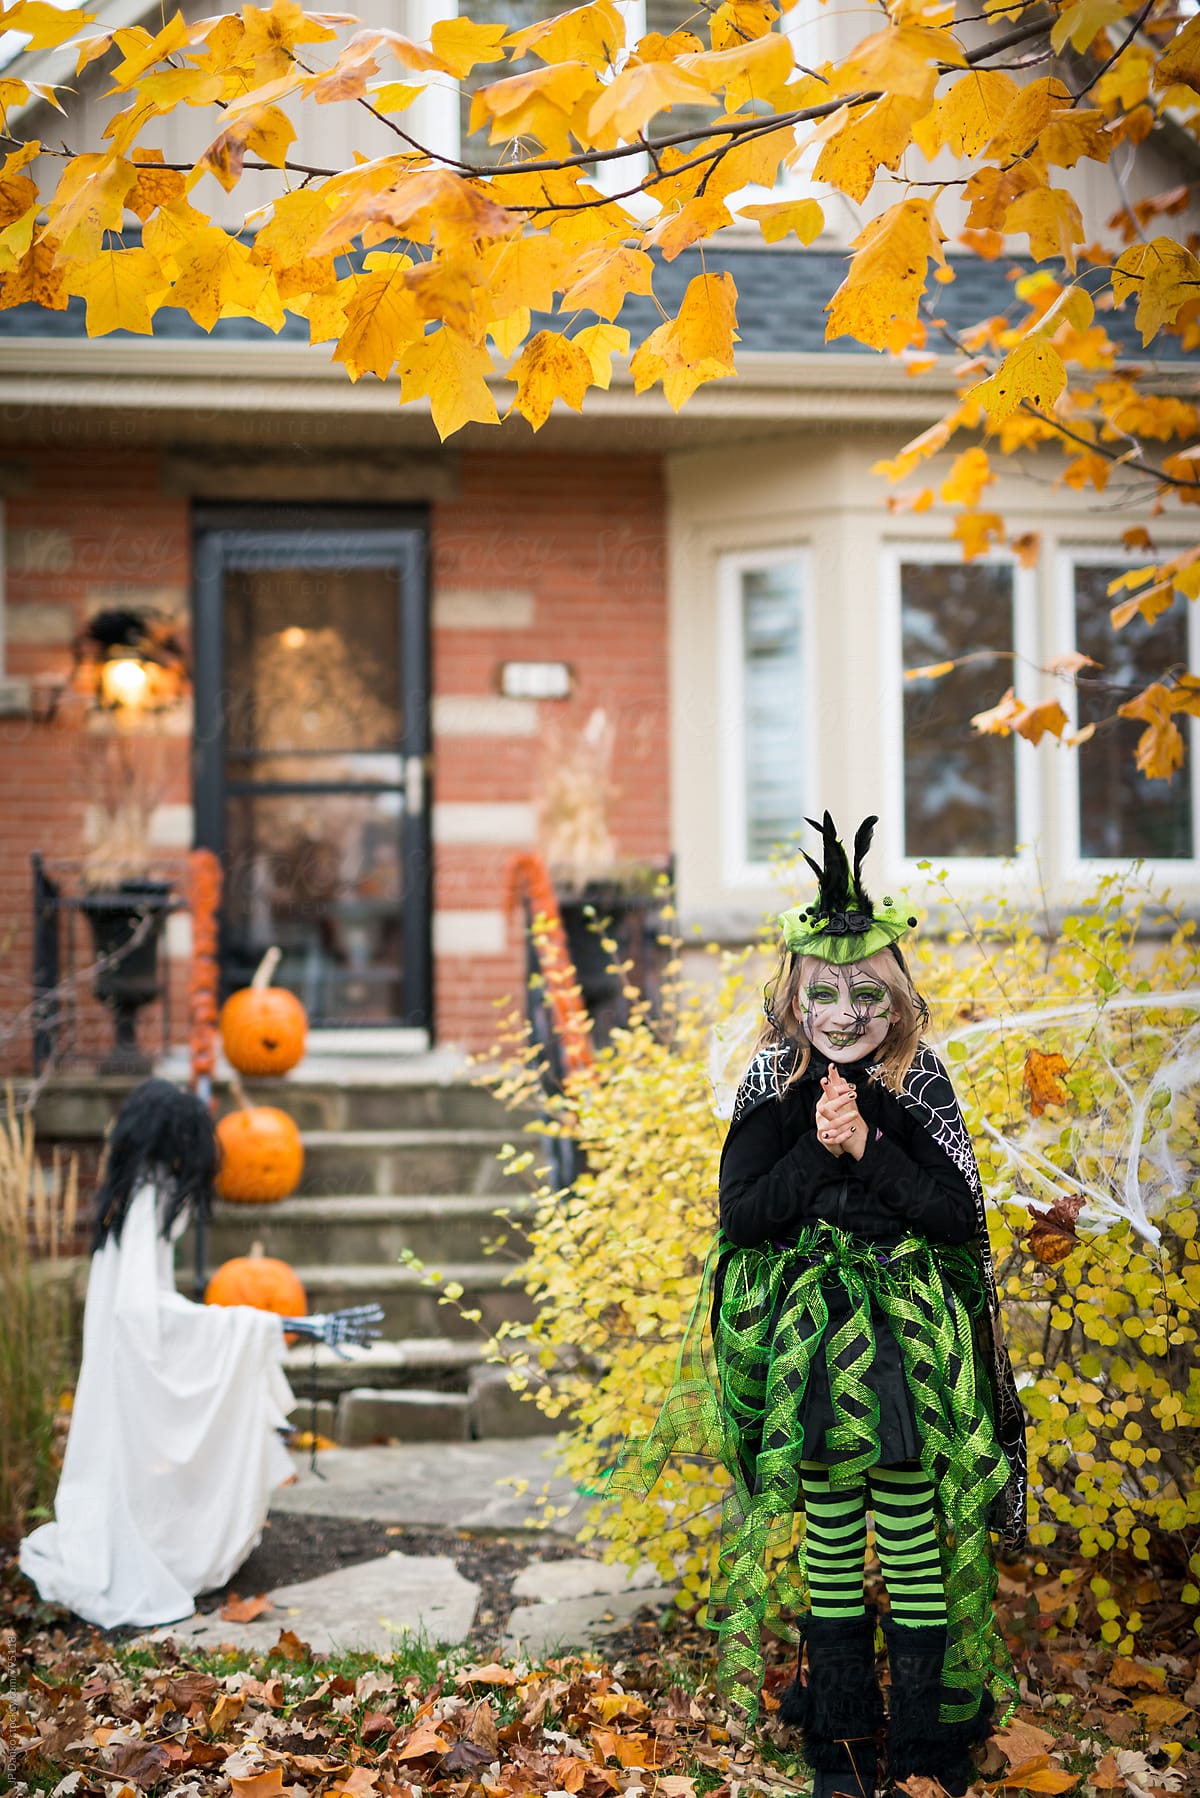 Girl Wearing Witch Costume Excited to Trick or Treat on Halloween